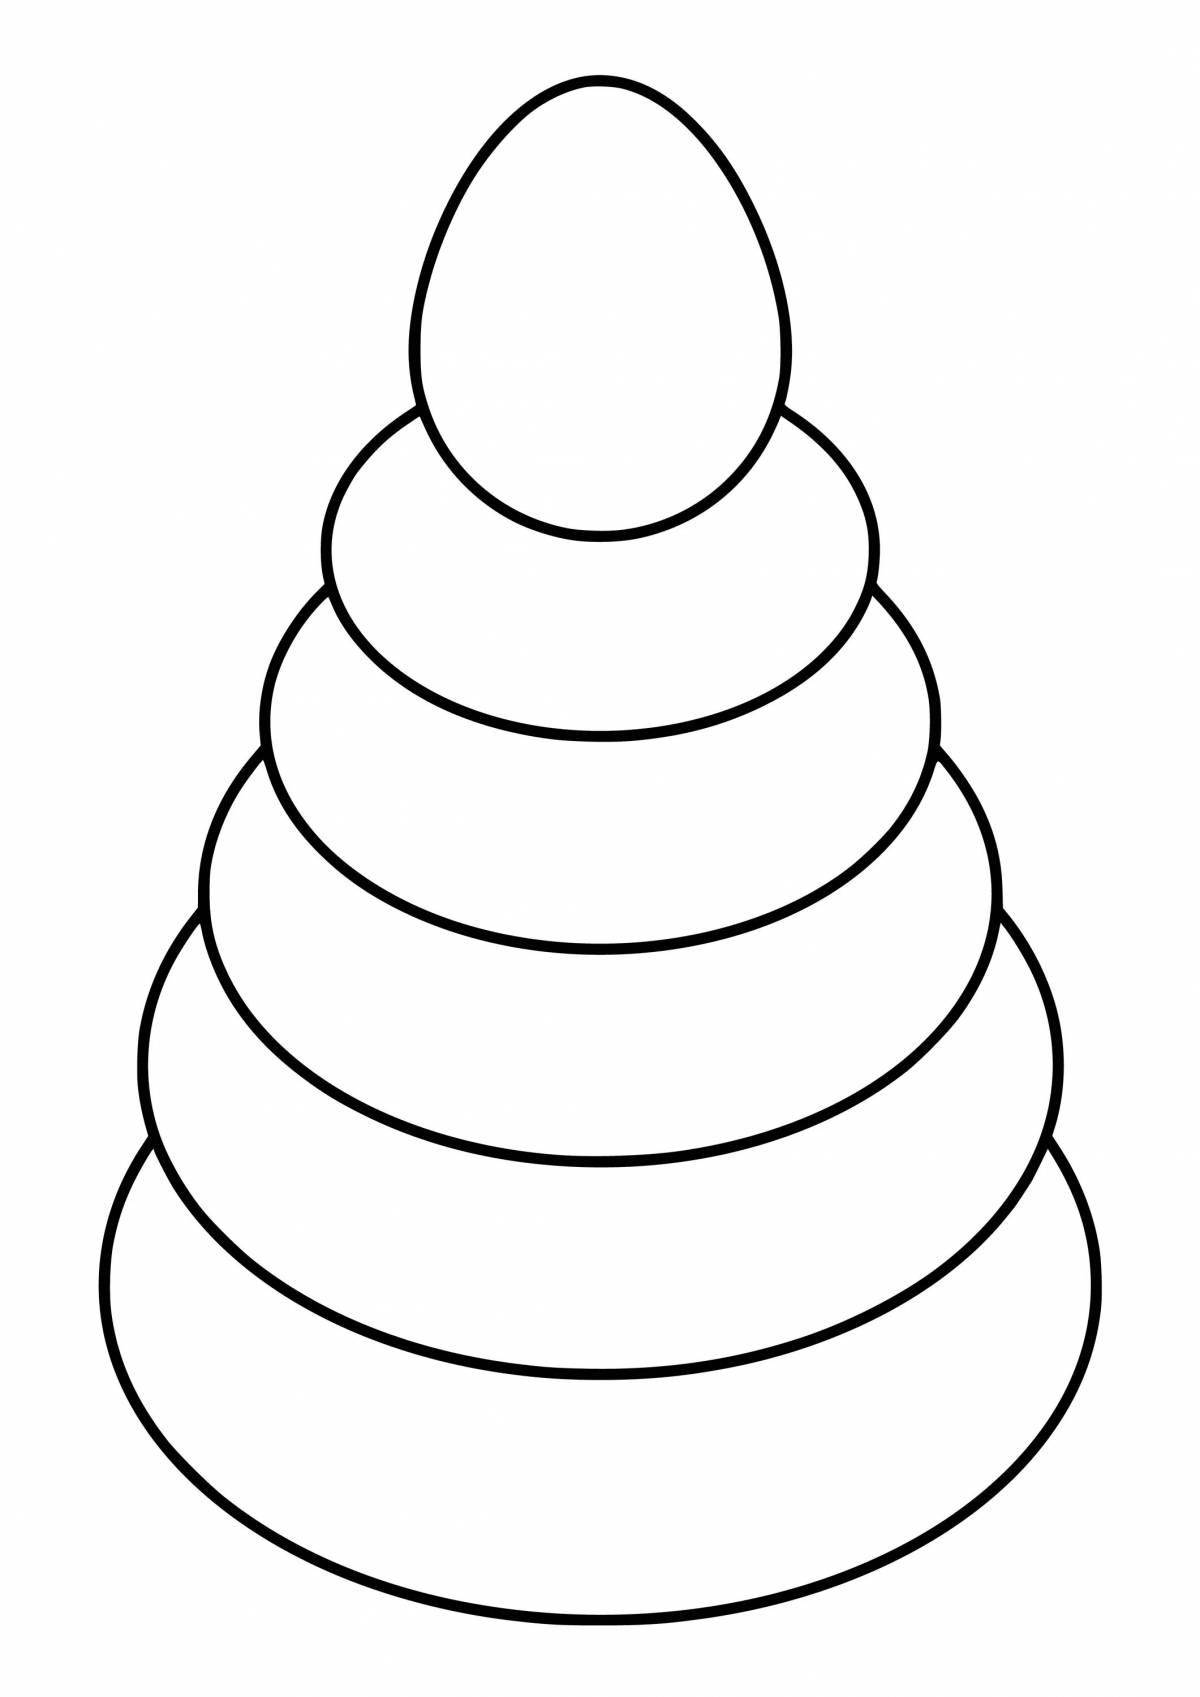 Colorful pyramid coloring page for kids